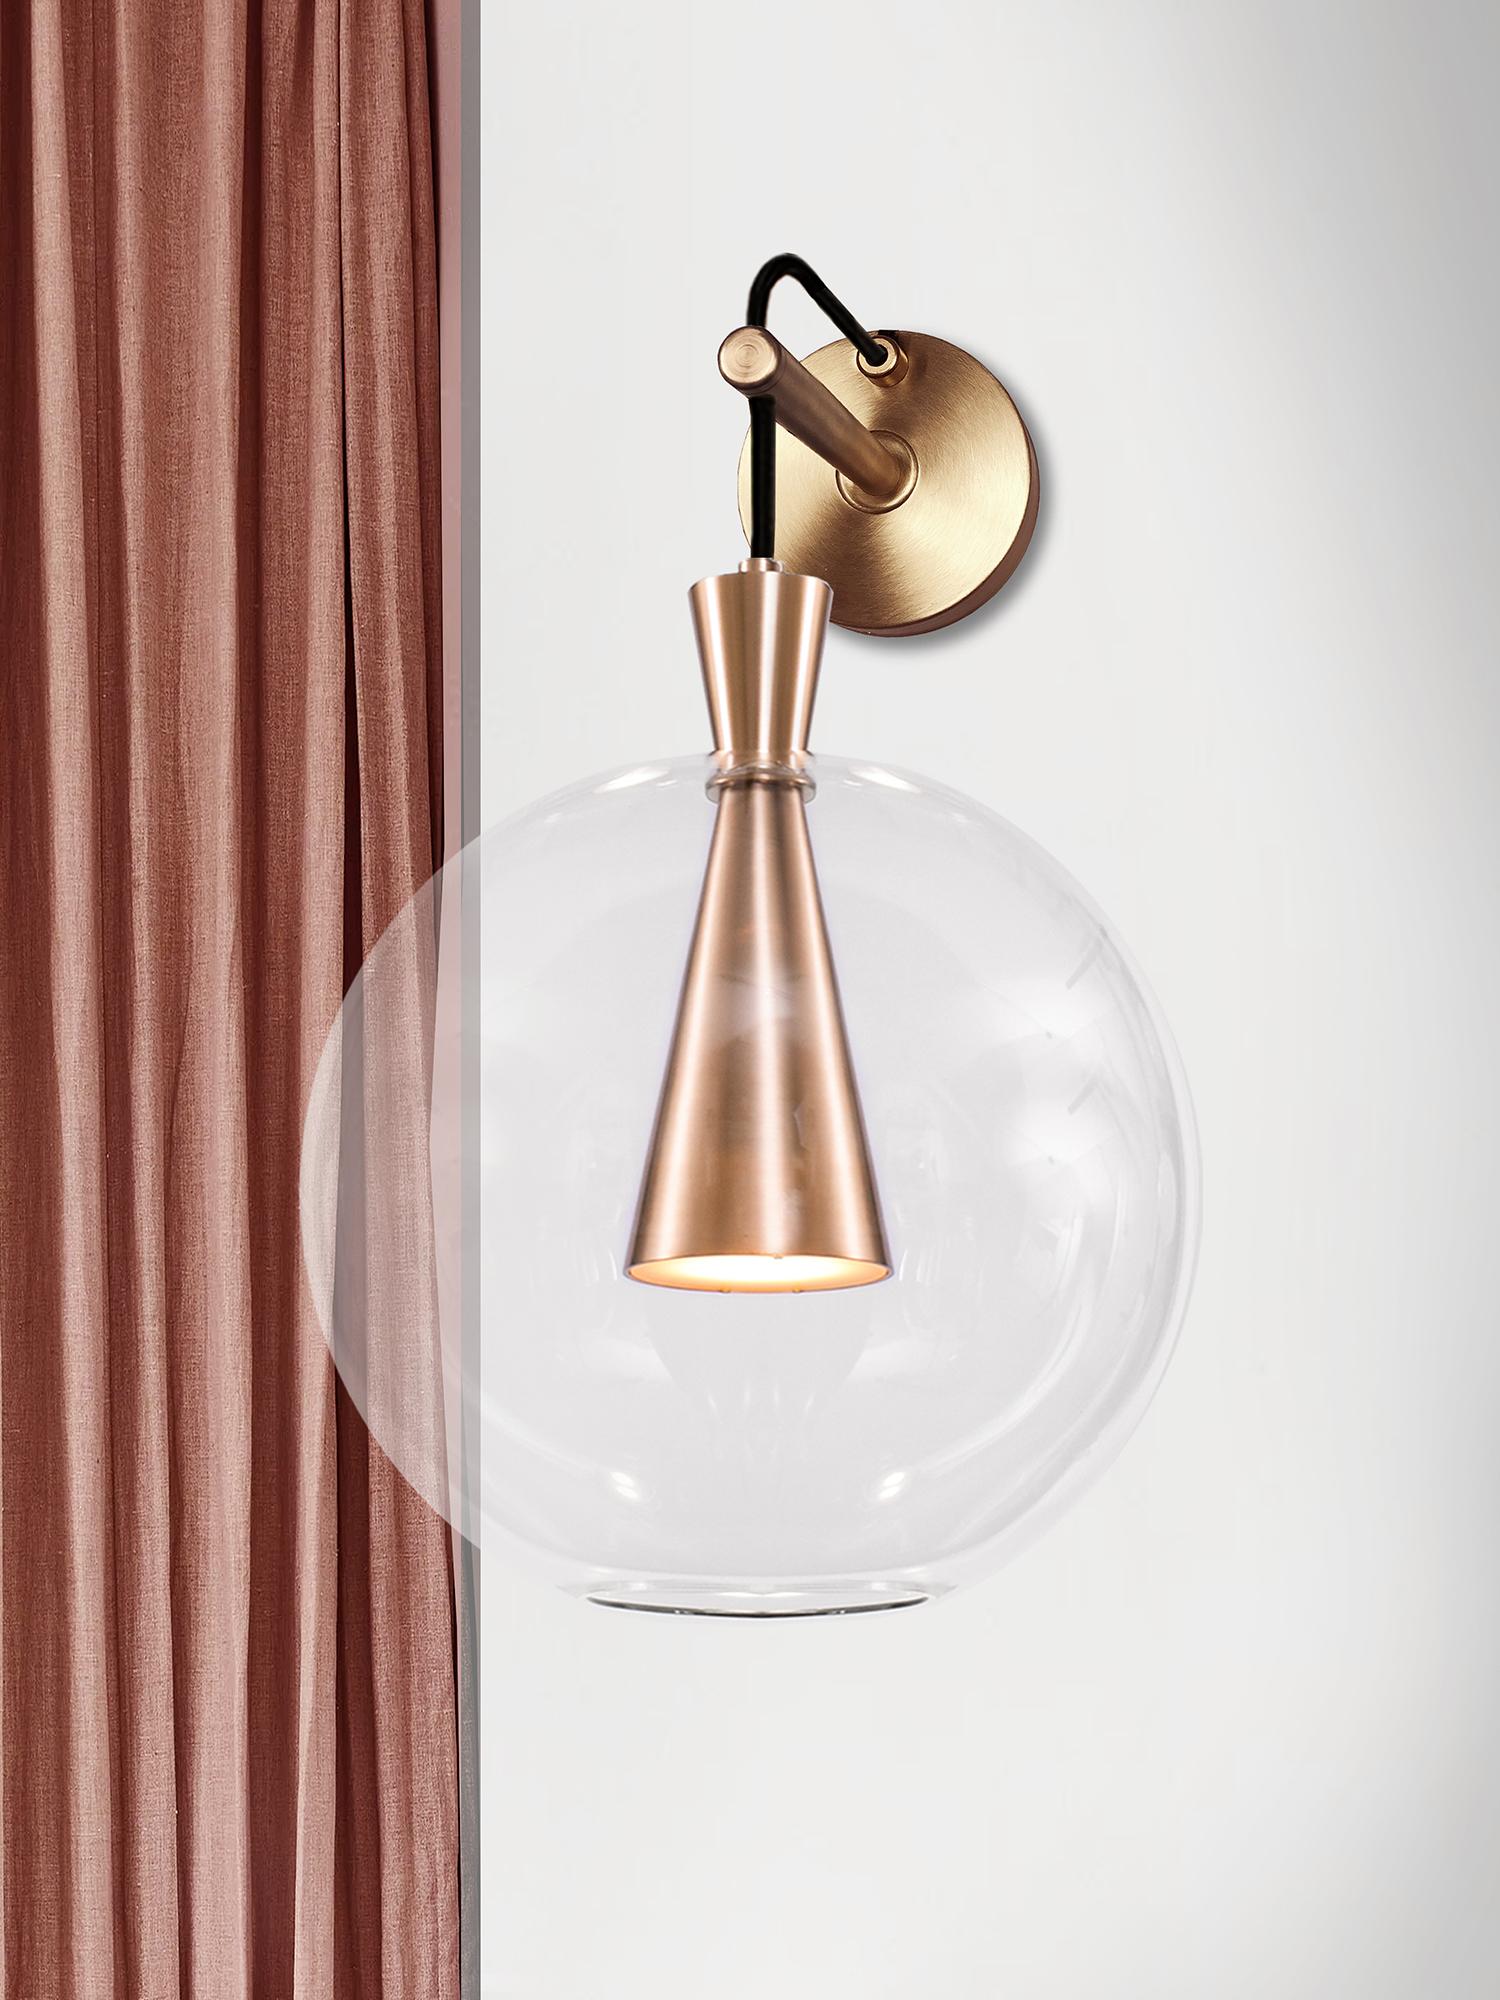 Cone is designed to showcase the beauty and timeless elegance of geometrical symmetry. Each cone is machined from a solid block of brass.

GU10 LED Bulb.